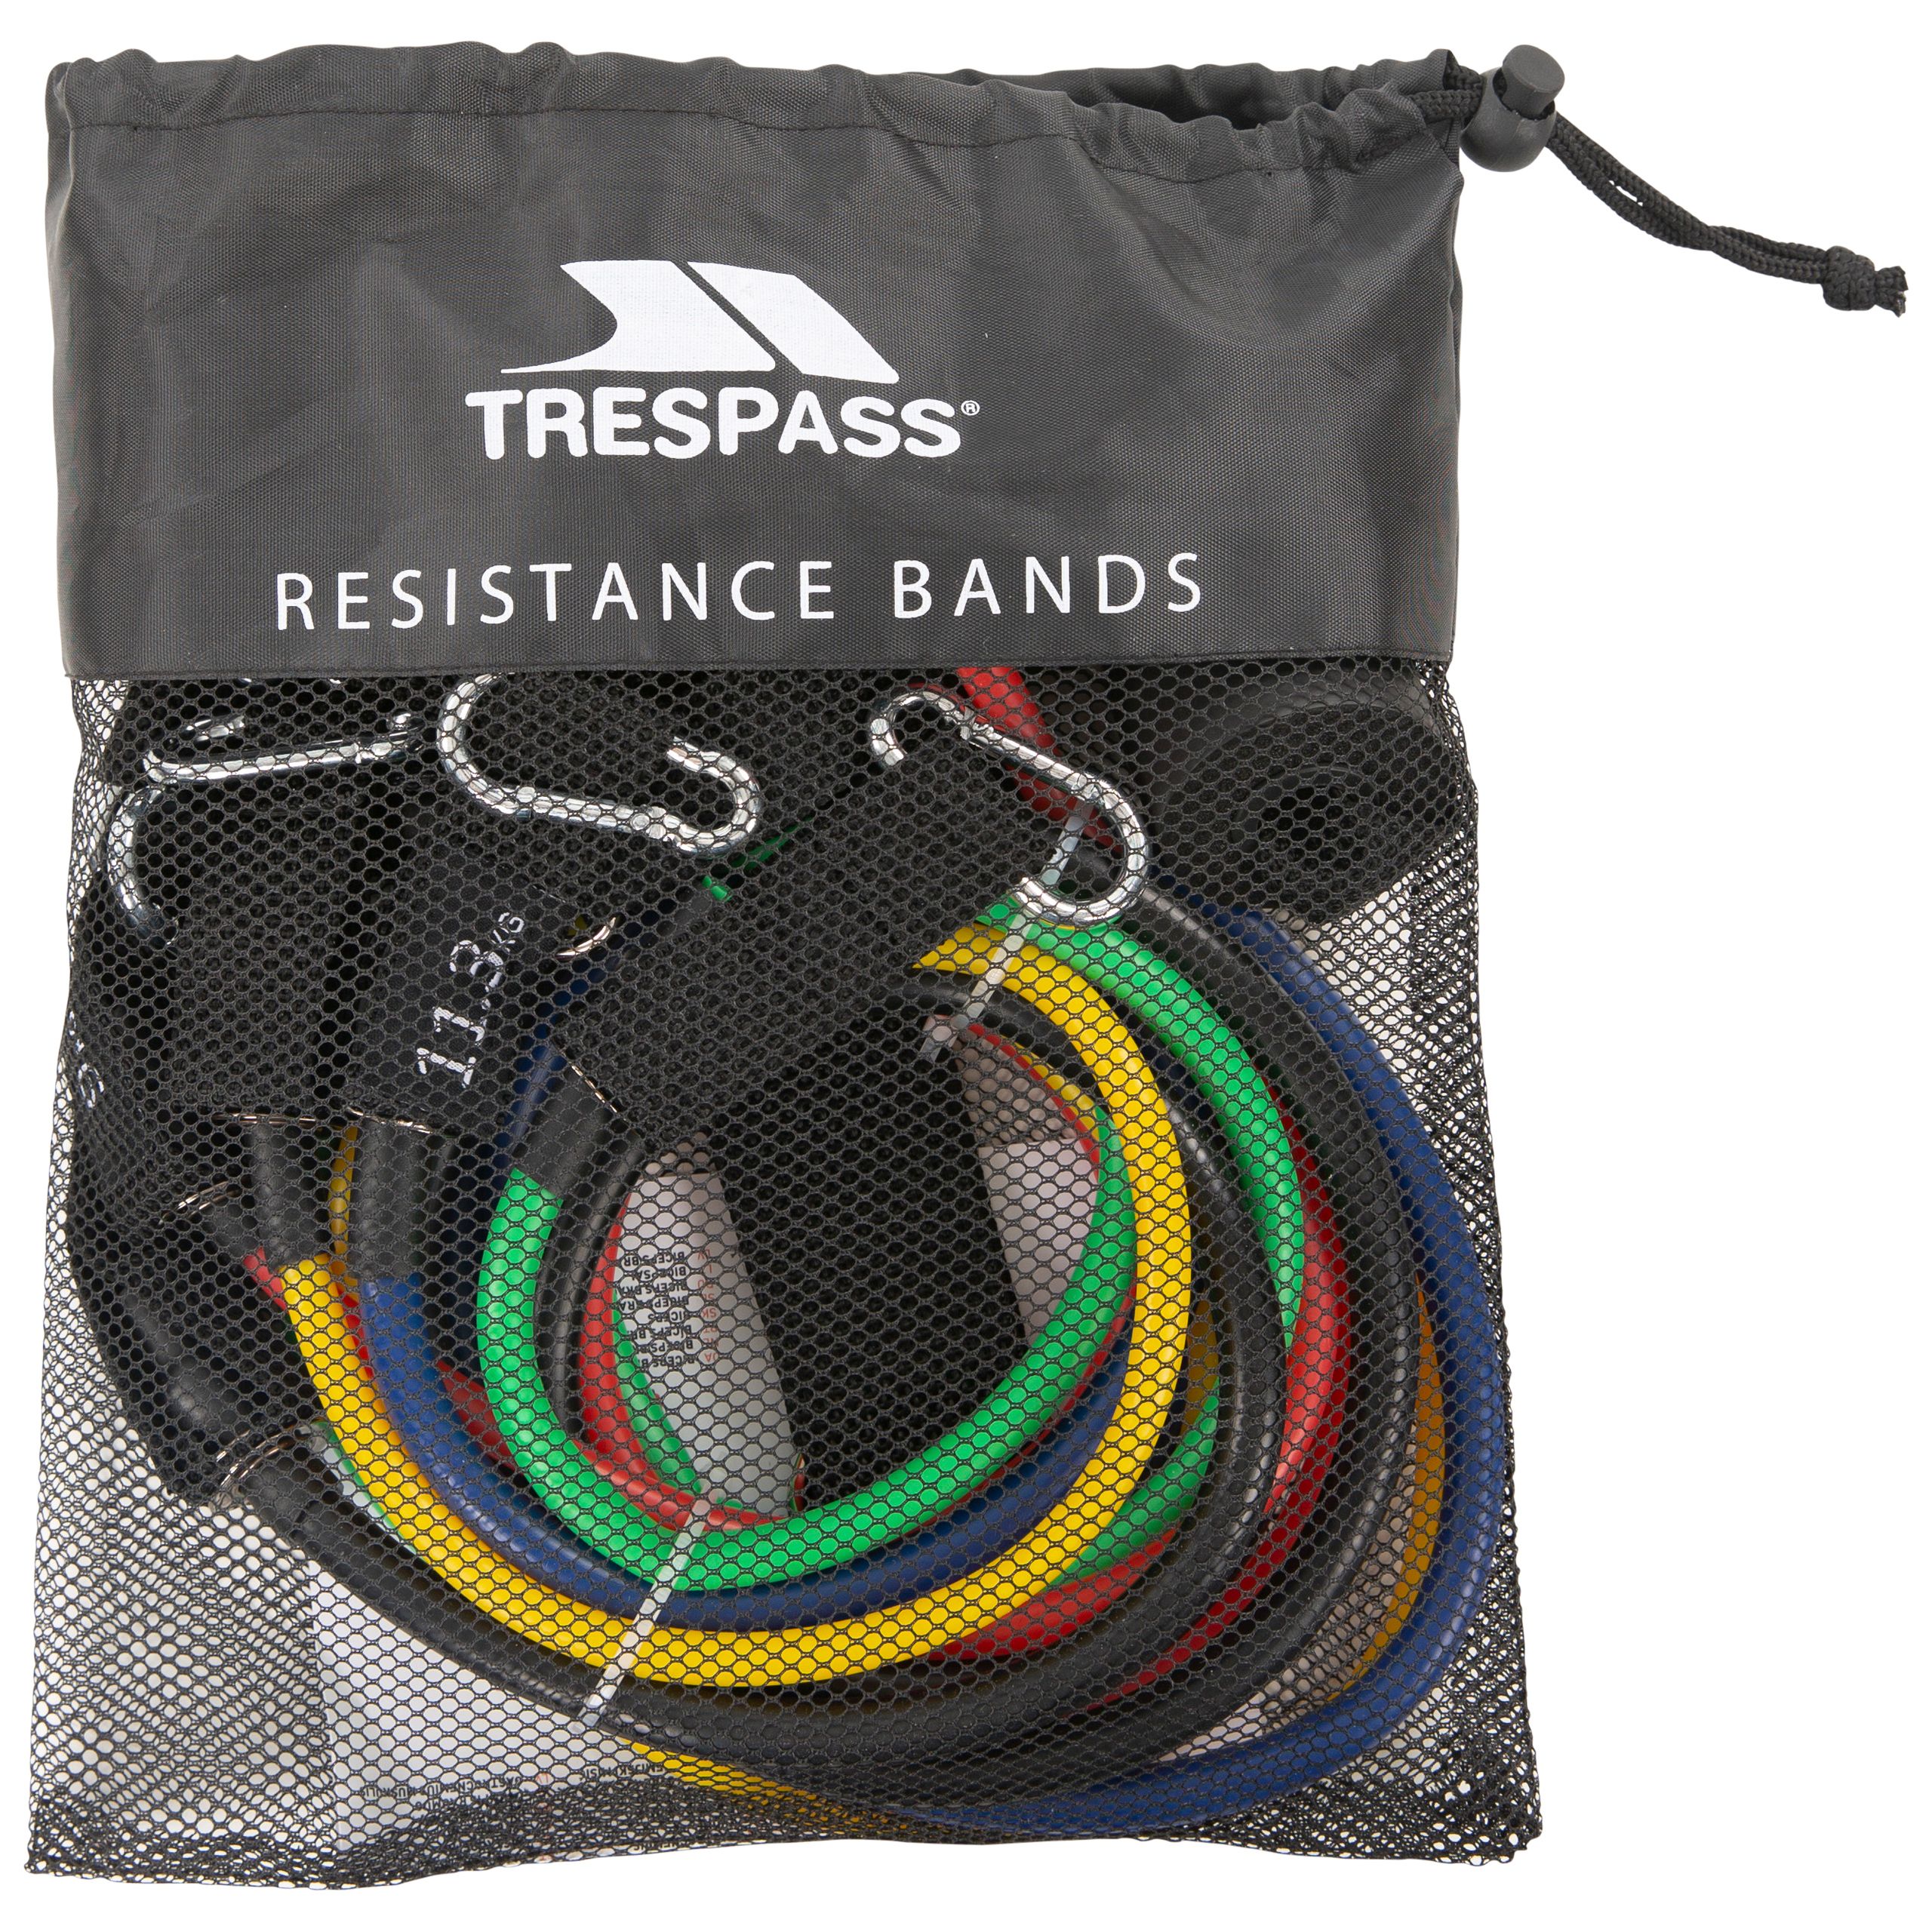 Trespass Resistance Band Kit Ripped